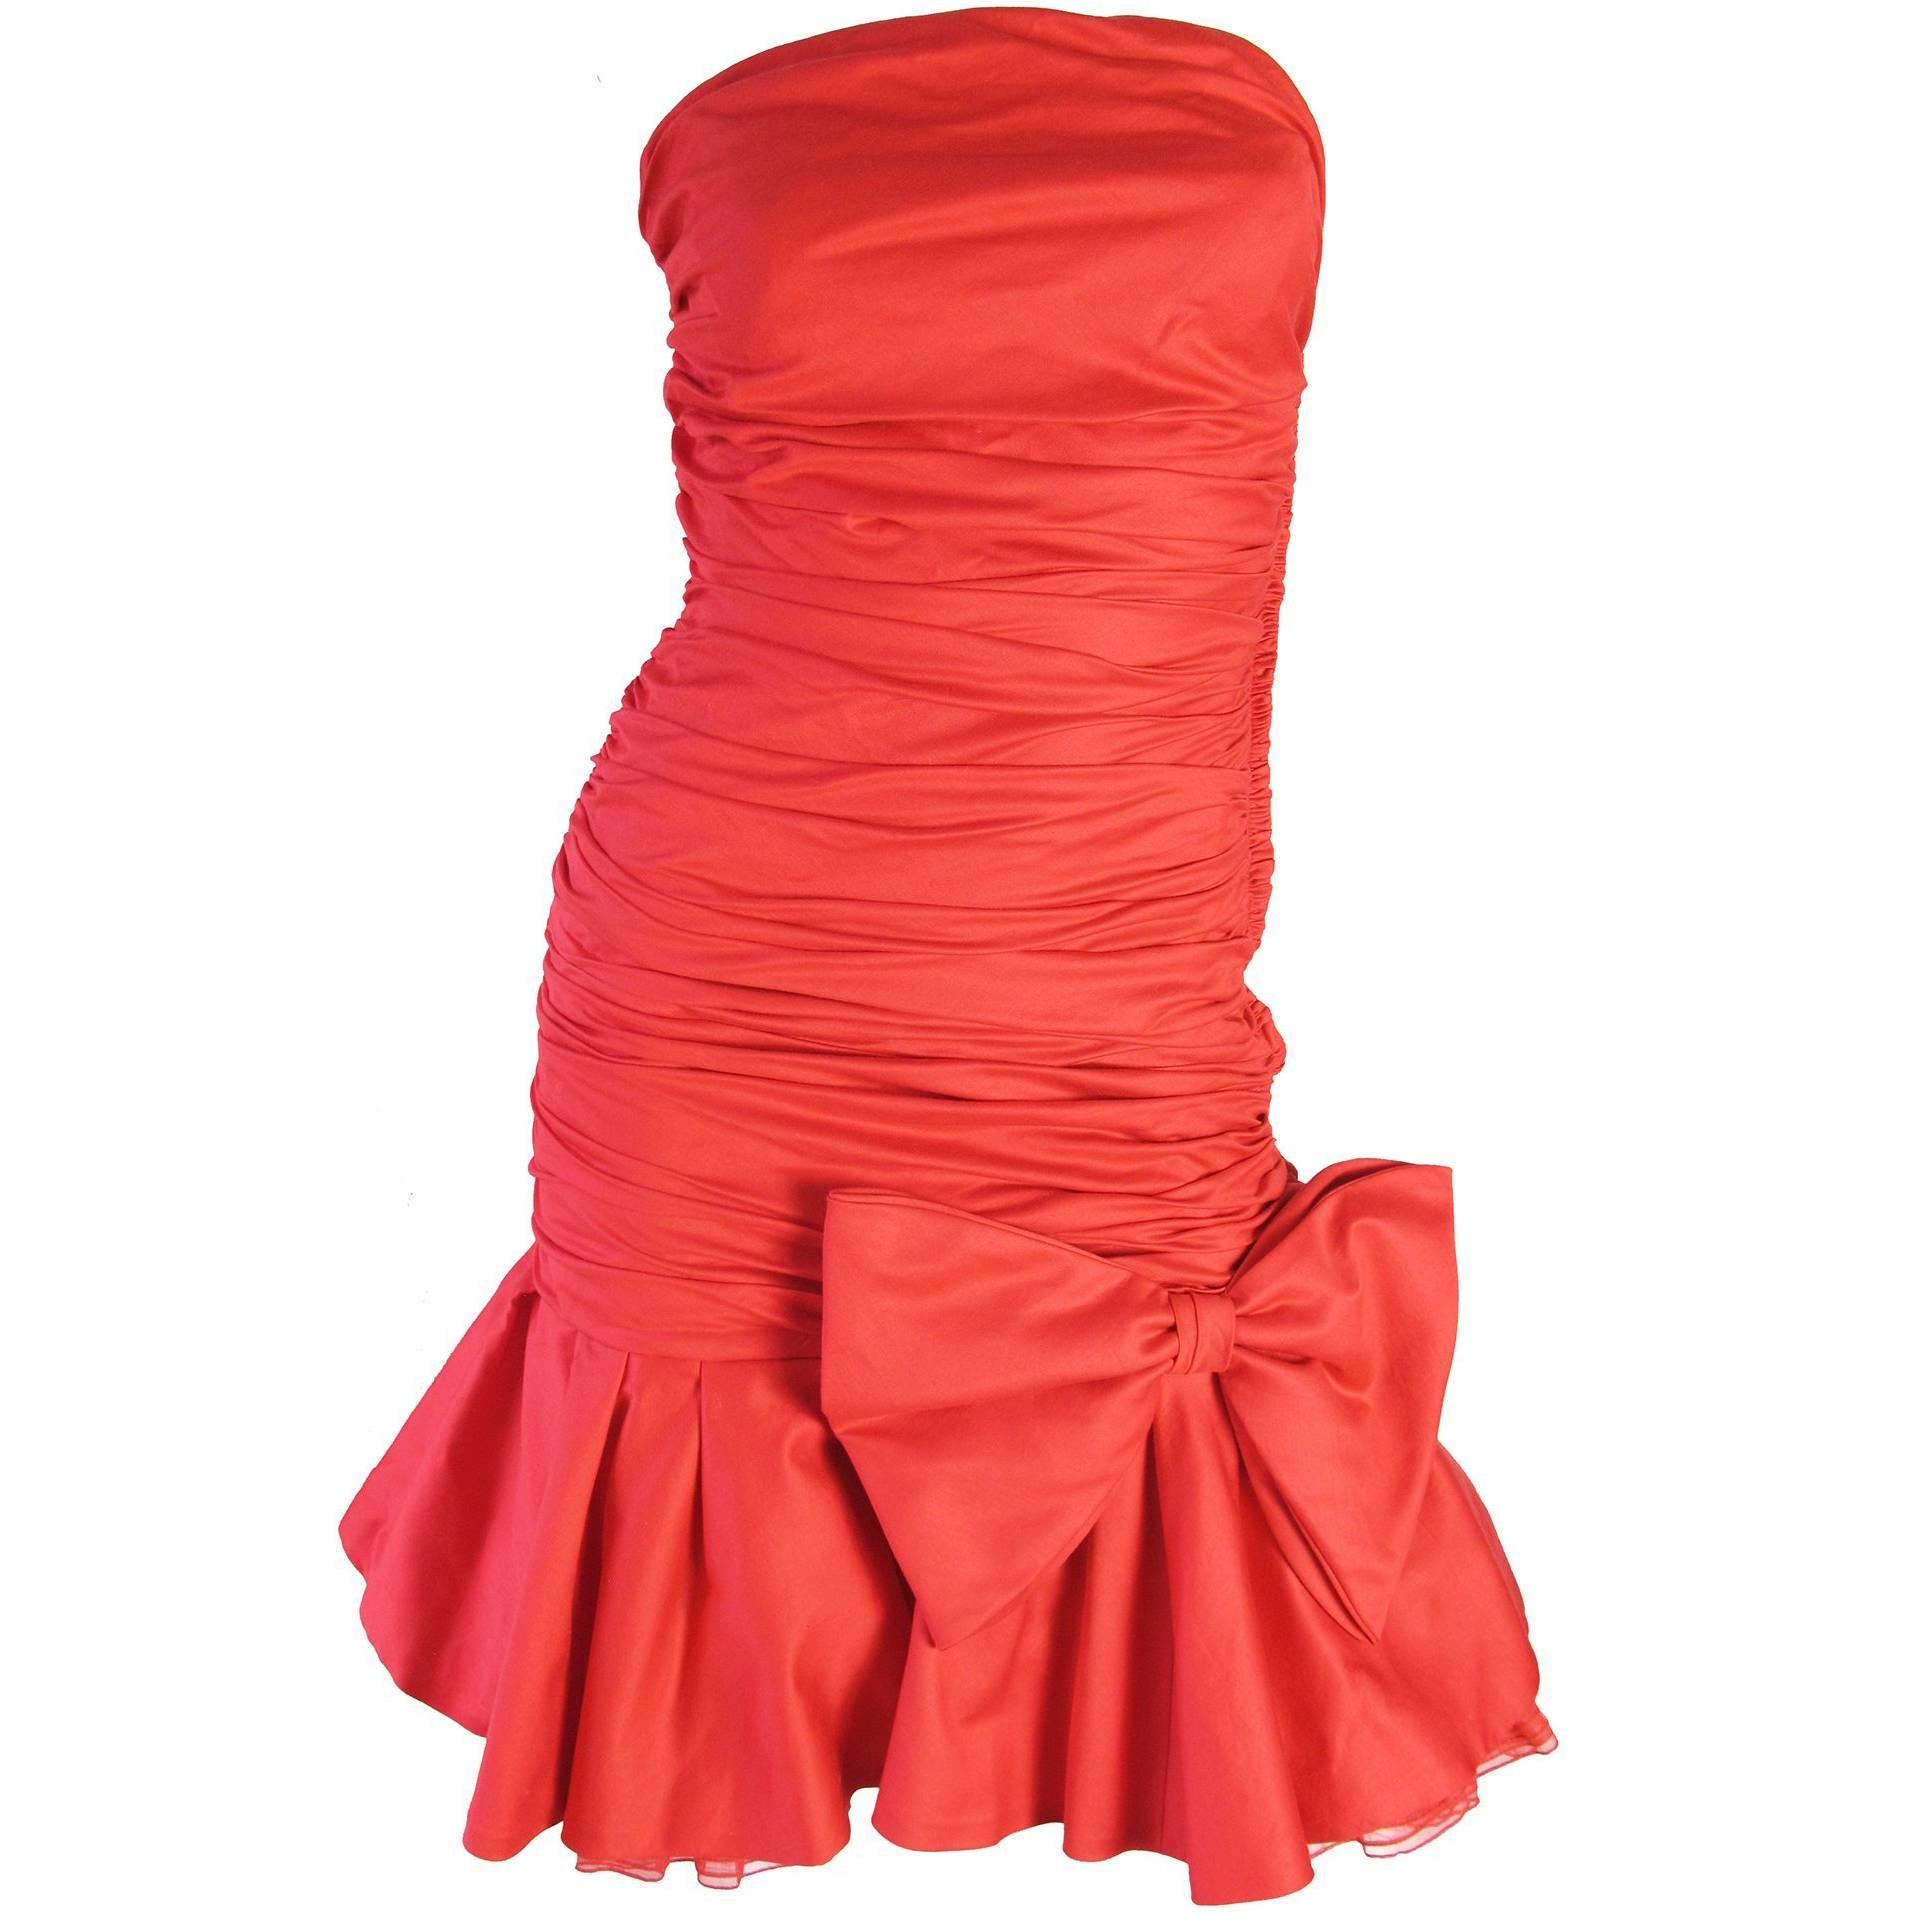 Christian Dior Strapless Red Dress with Ruffle, 1980s 